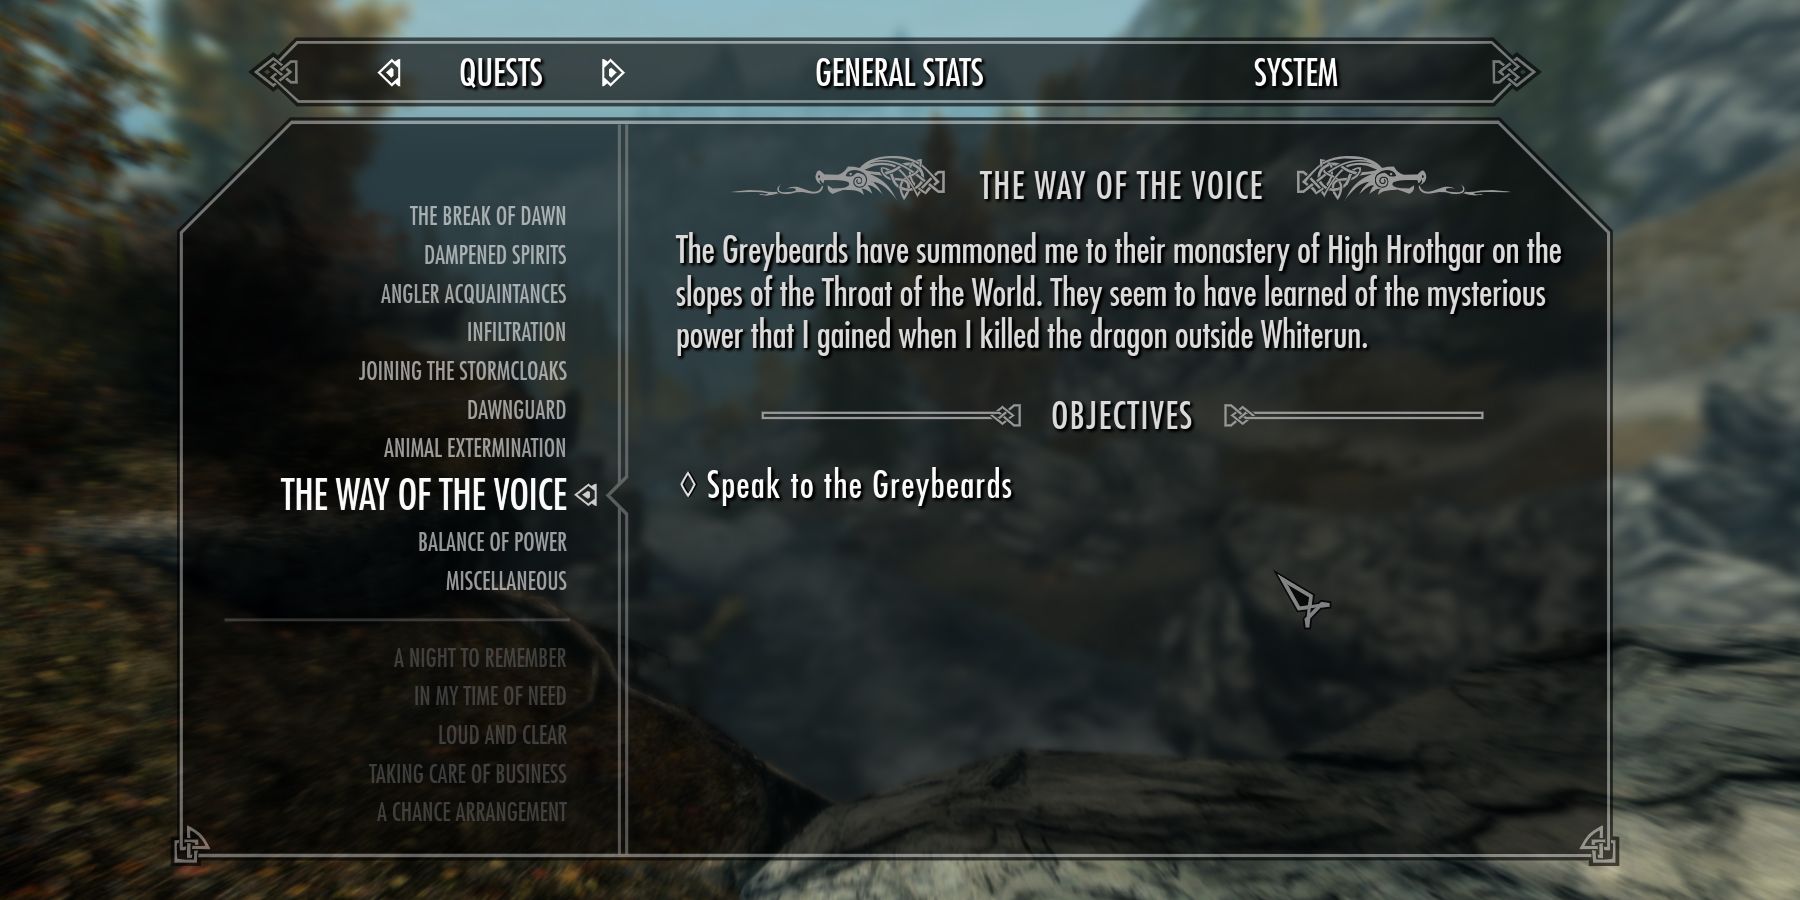 Skyrim: The Way of the Voice Quest